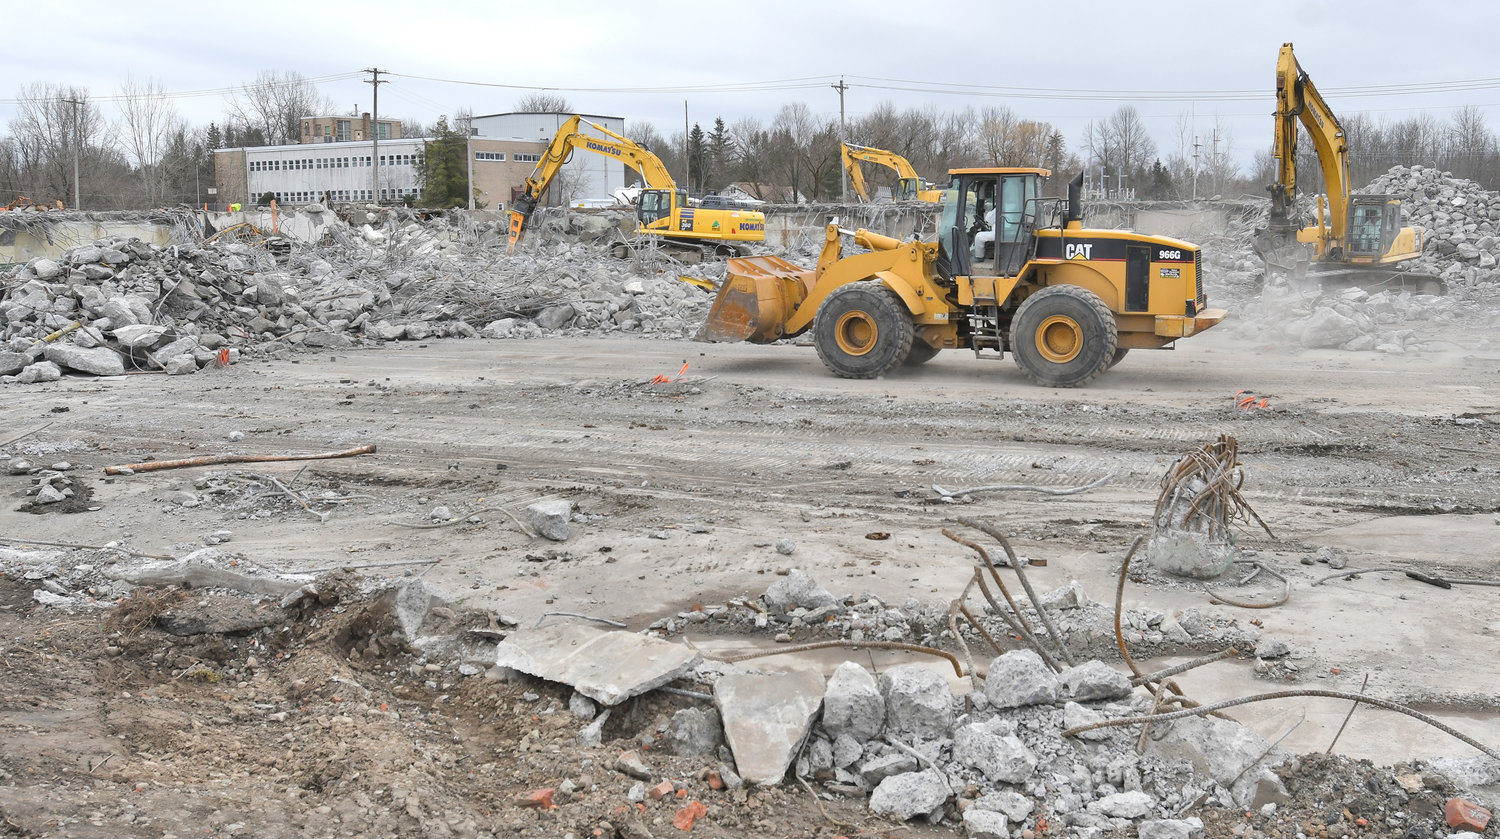 MORE HELP ON THE WAY — The former Rome Cable site is shown during demolition in this file photo. A group of consultants are coming to Rome to help local agencies and officials develop a plan for its marketing and reuse.